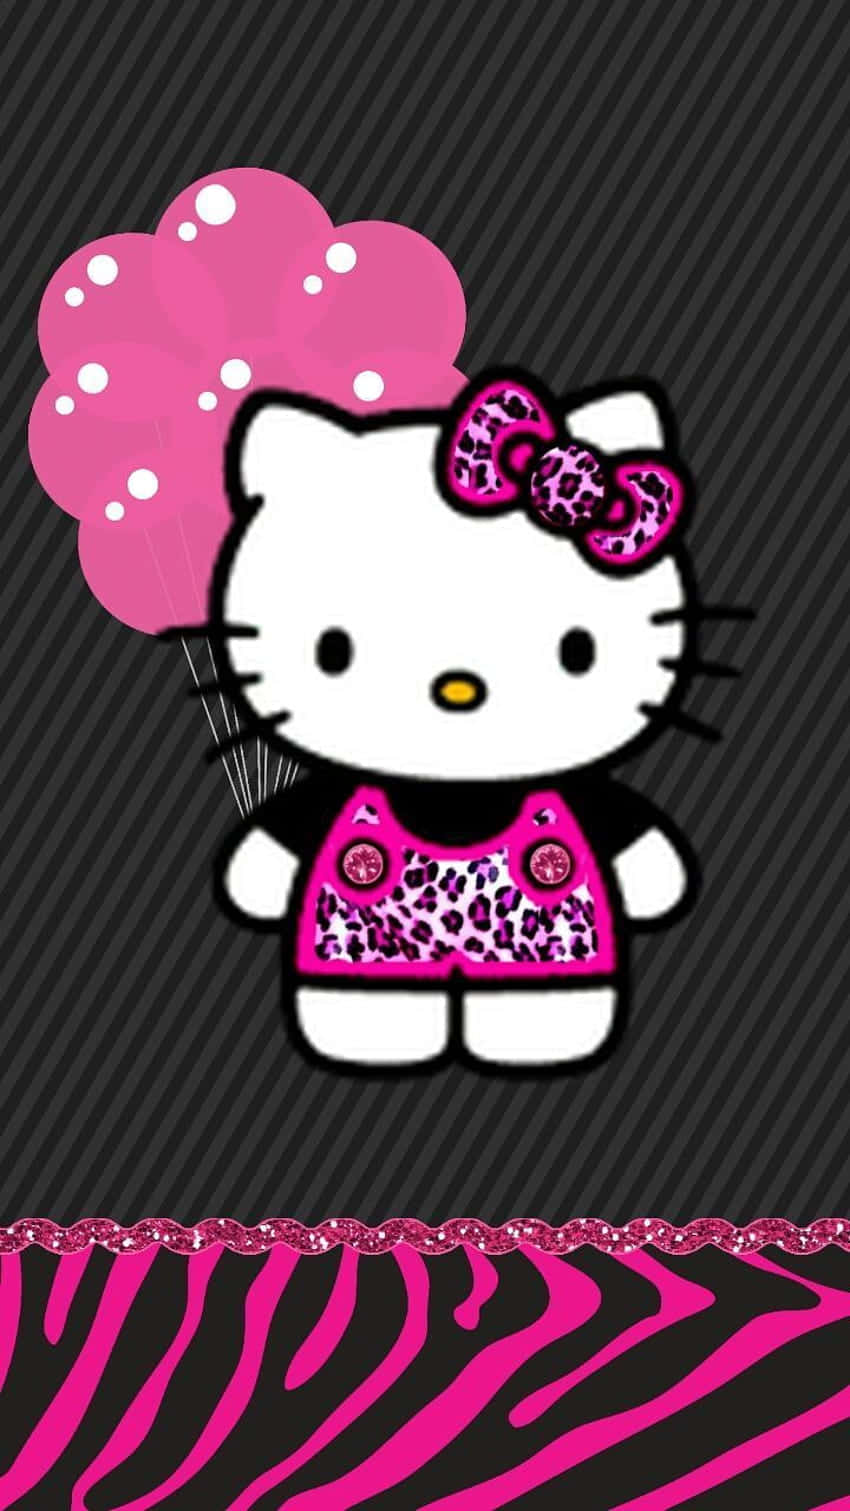 Hello Kitty With Balloons And Zebra Print Wallpaper